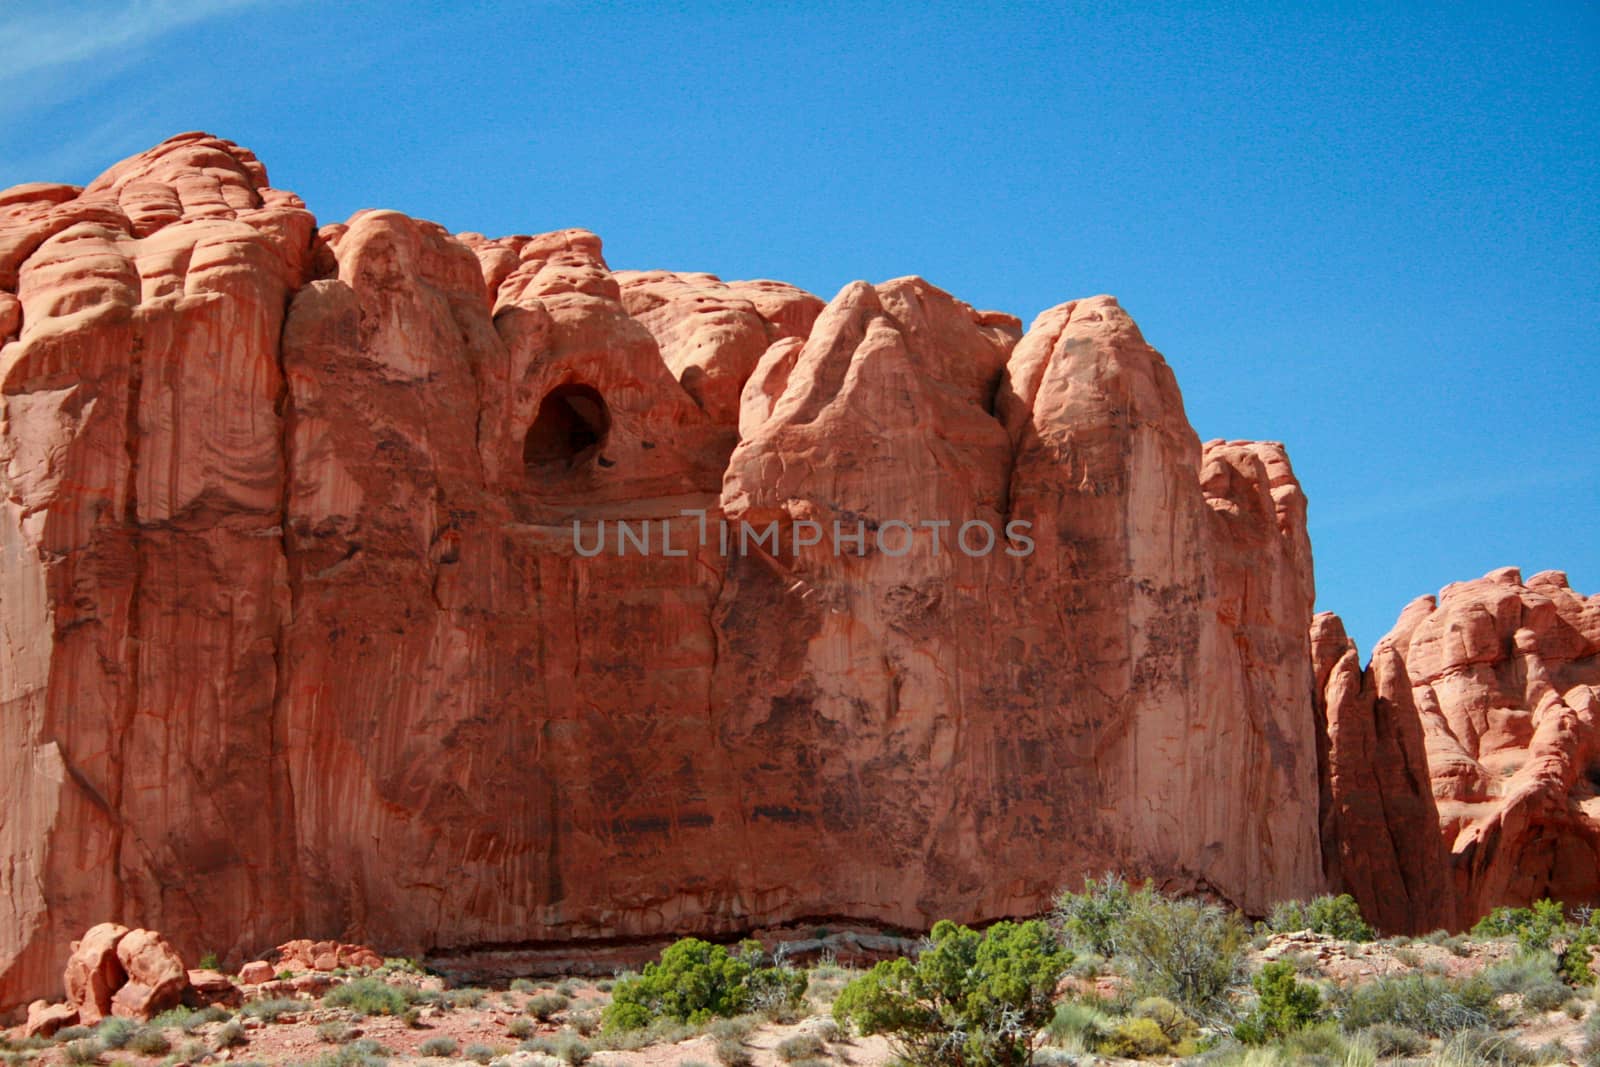 A red rock formation with a cave carved out of Entrada Sandstone in Arches National Park near Moab Utah.